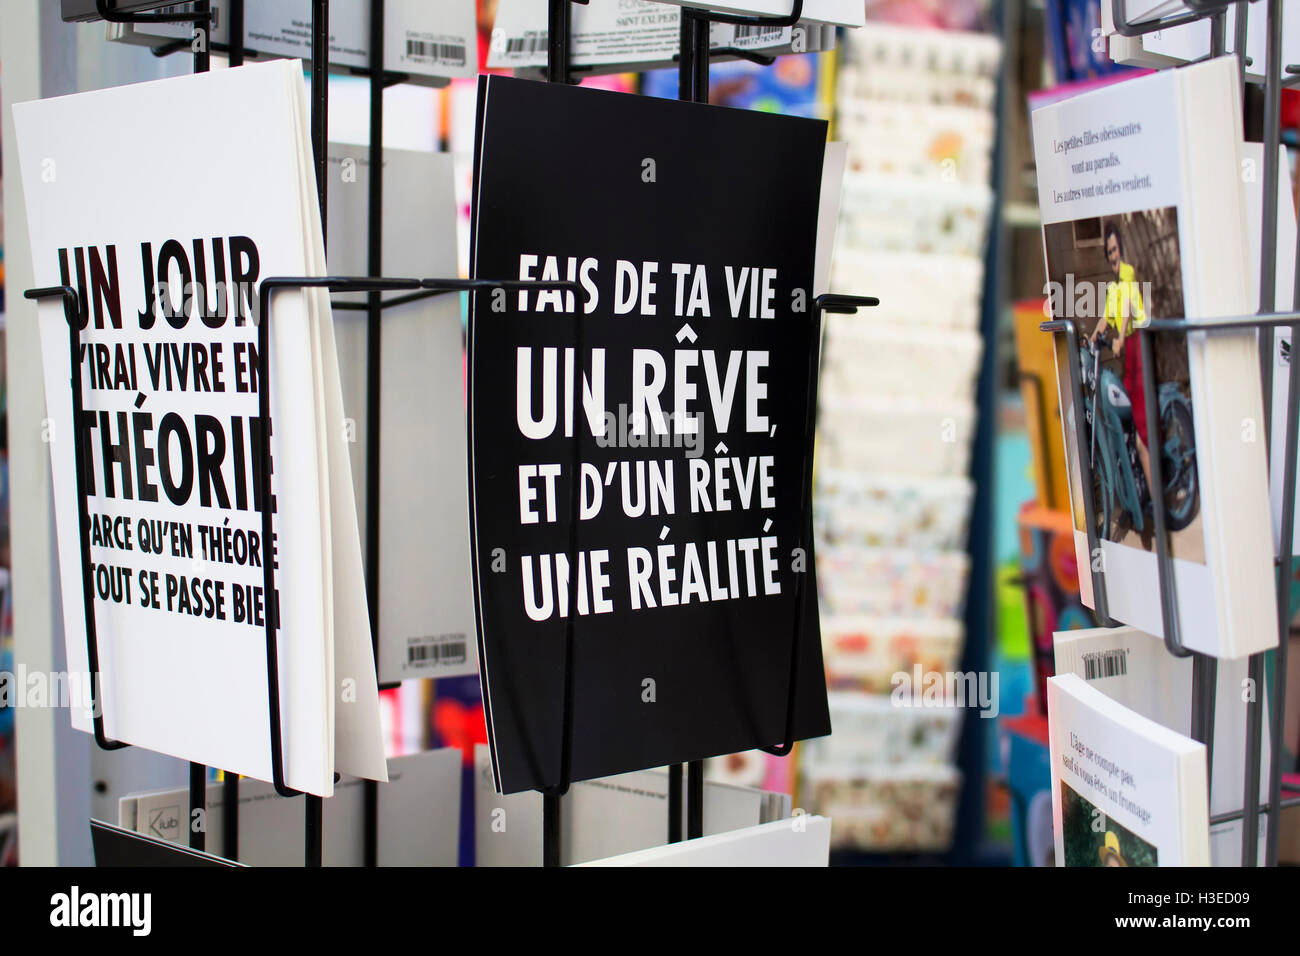 Close up view of French postcards on racks about humour on Rue Montorgueil street in Paris. Stock Photo